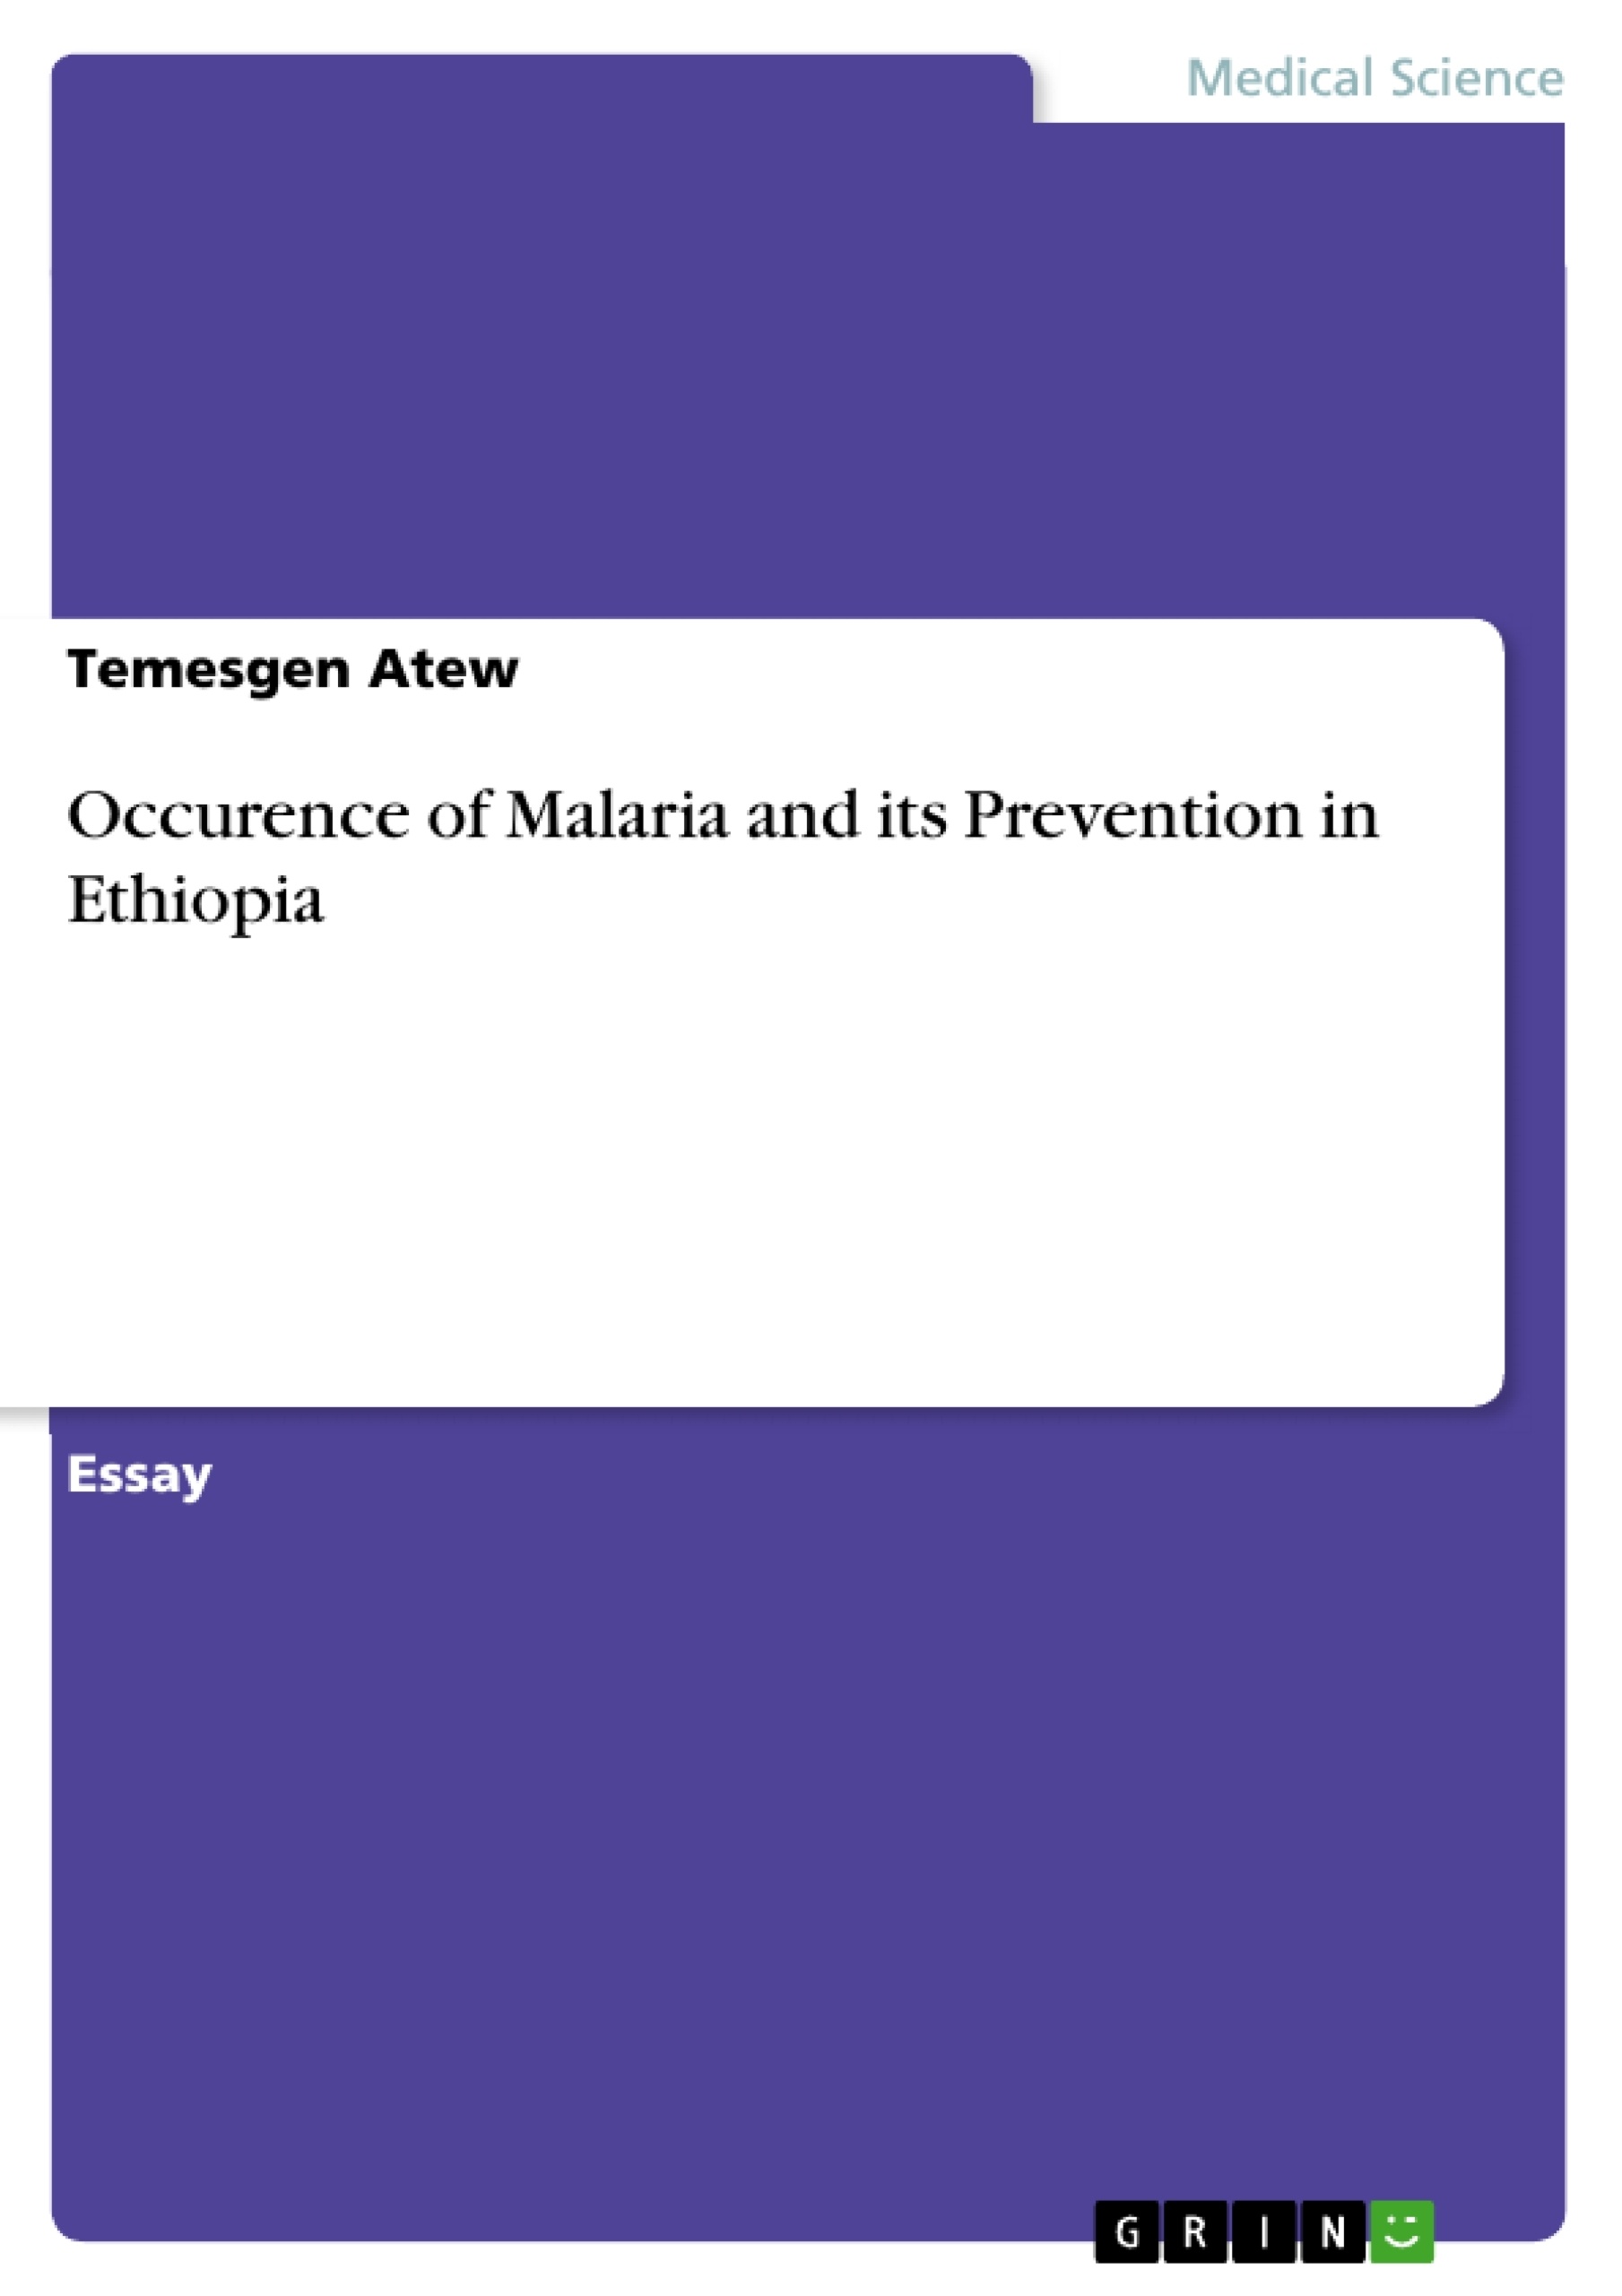 Título: Occurence of Malaria and its Prevention in Ethiopia